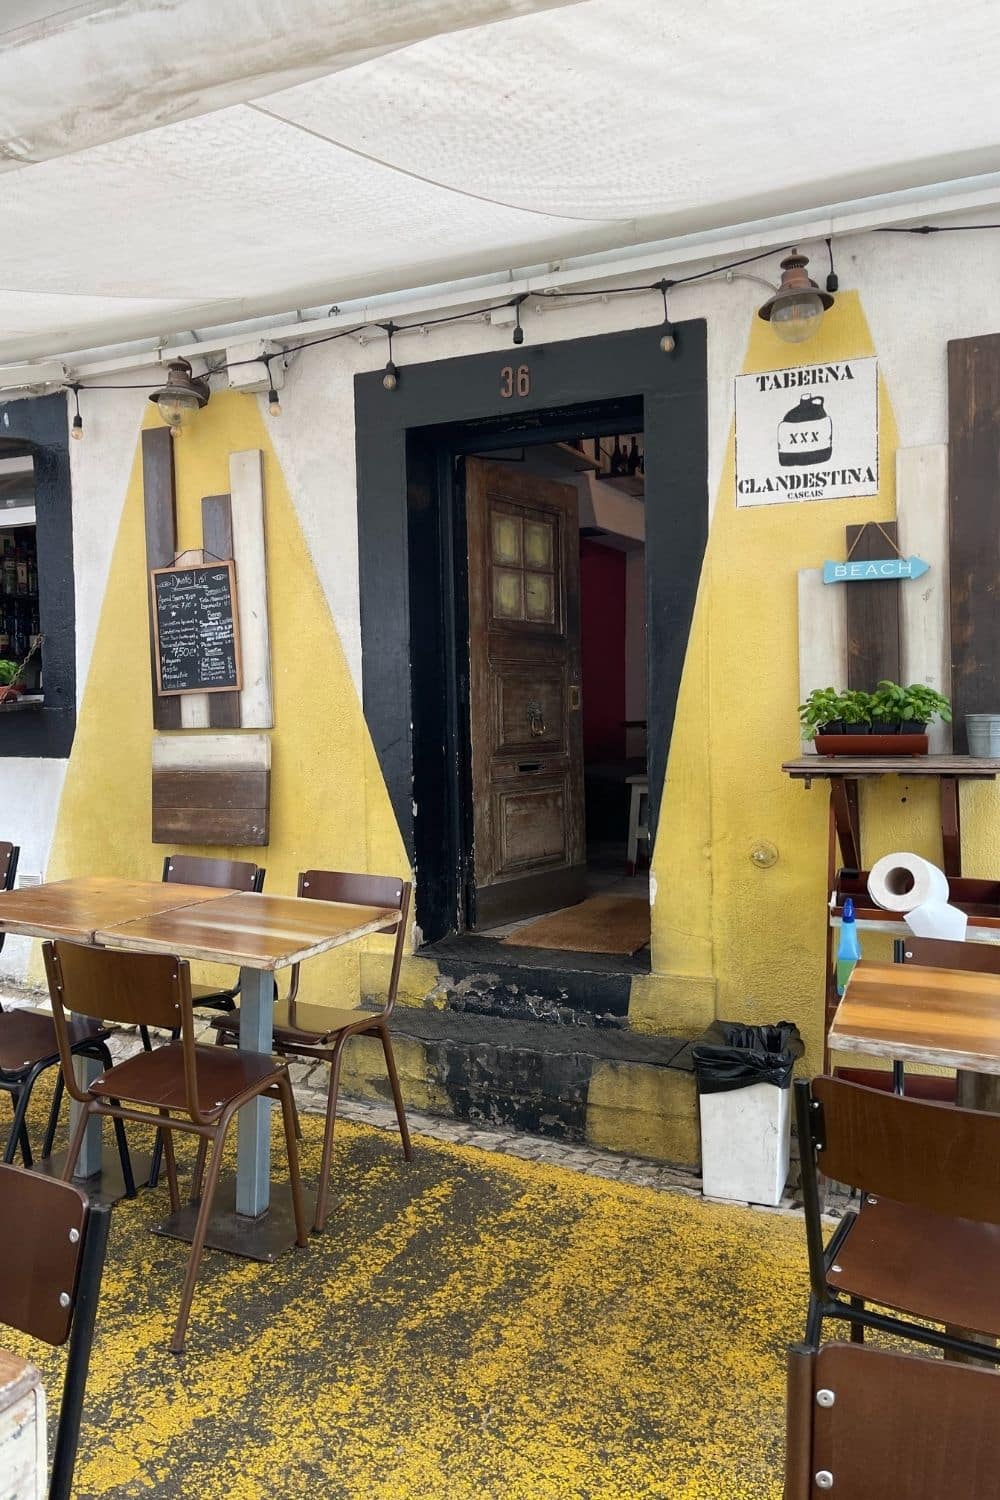 Exterior of Taberna Clandestina, with a yellow facade and black trim around the entrance, featuring rustic wood and metal furniture on cobblestone sprinkled with fallen yellow leaves, welcoming diners in Cascais.